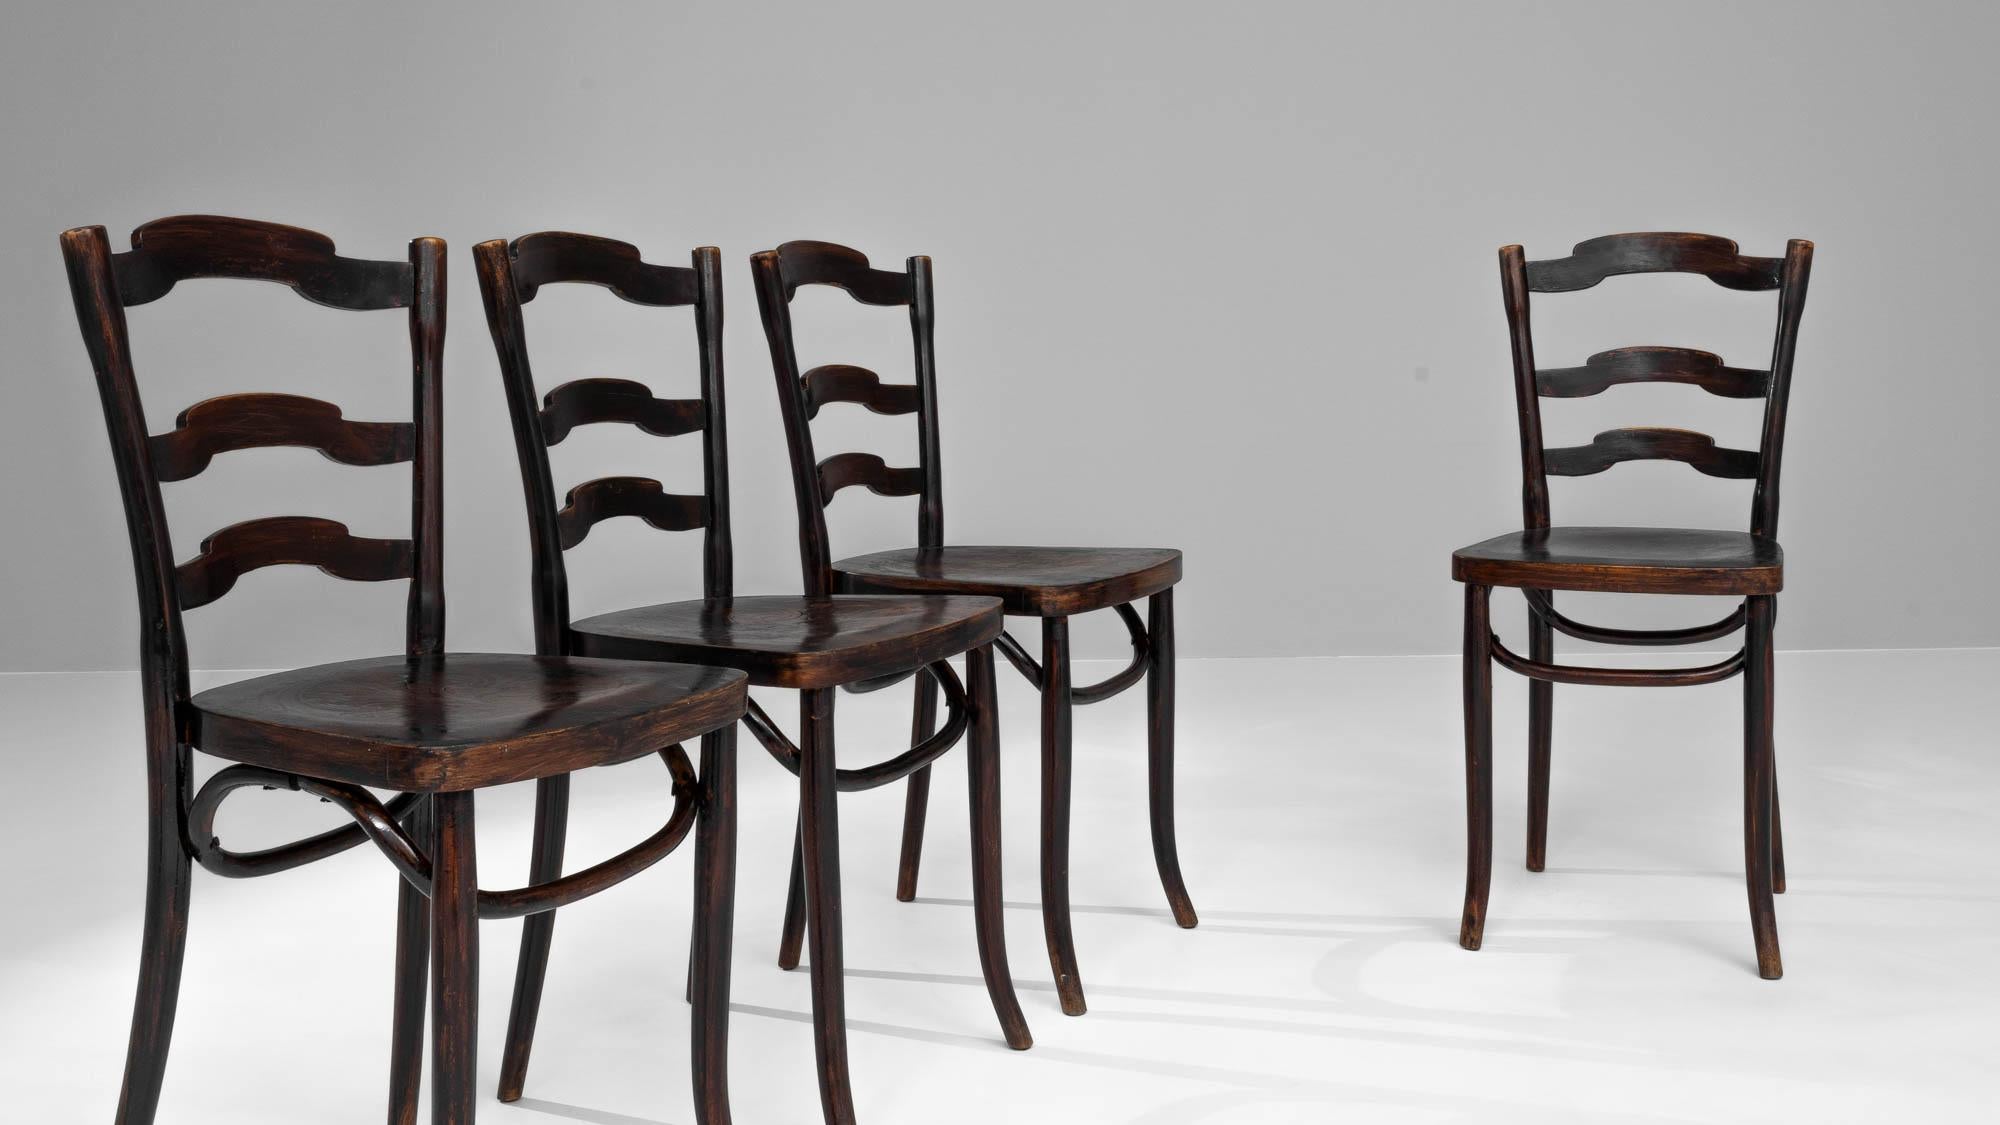 Step back in time with this exquisite set of four Early 20th Century French Wooden Dining Chairs, a classic addition to any dining room. Each chair has been meticulously crafted, boasting a rich, dark wood finish that highlights the natural grain